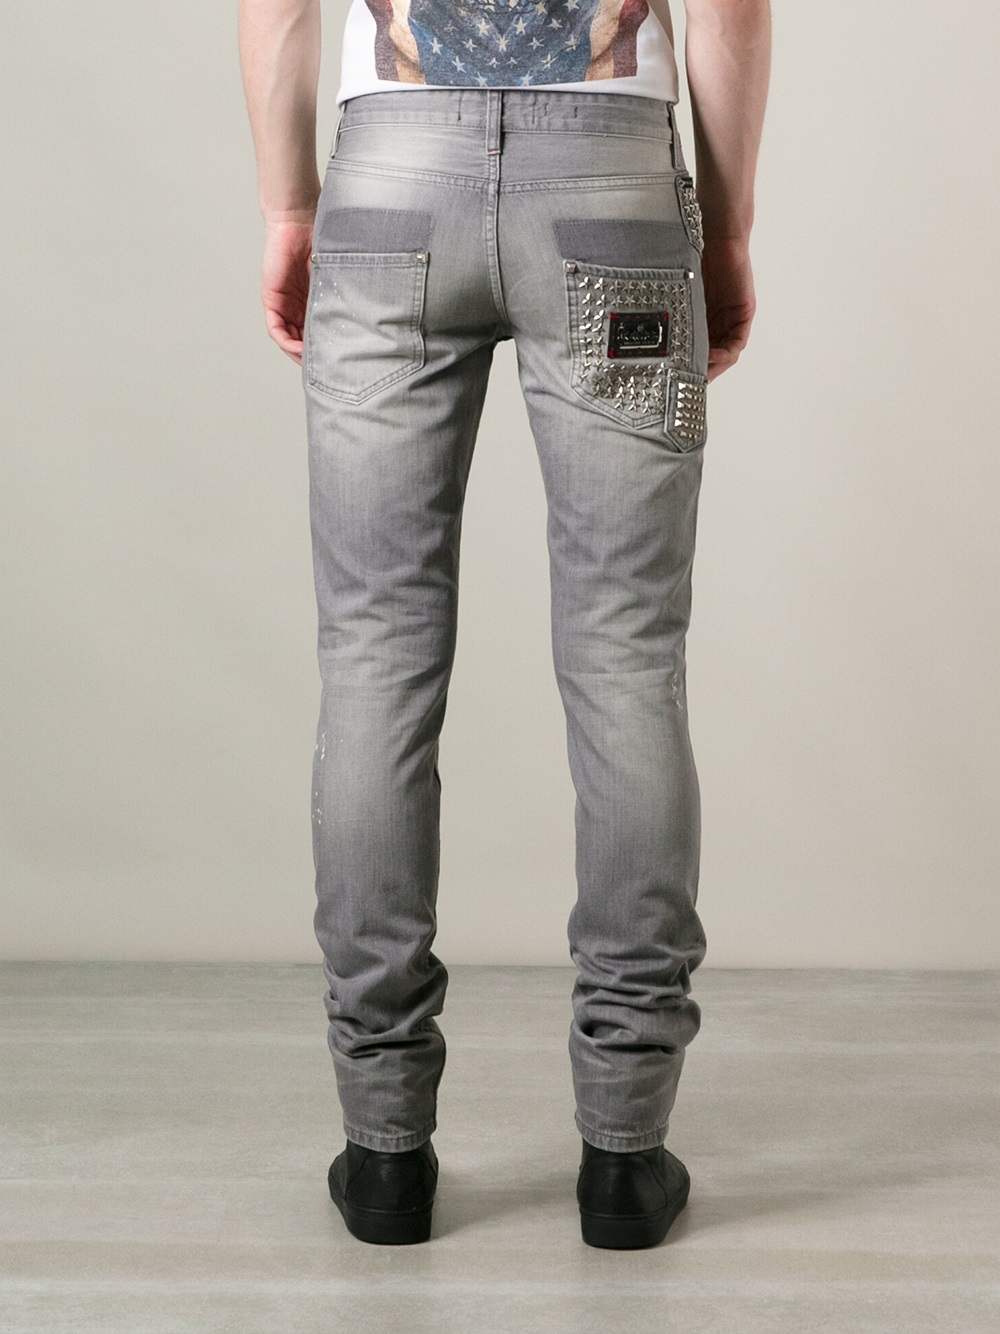 Philipp Plein Supreme Studded Slim Fit Jeans in Gray for Men | Lyst